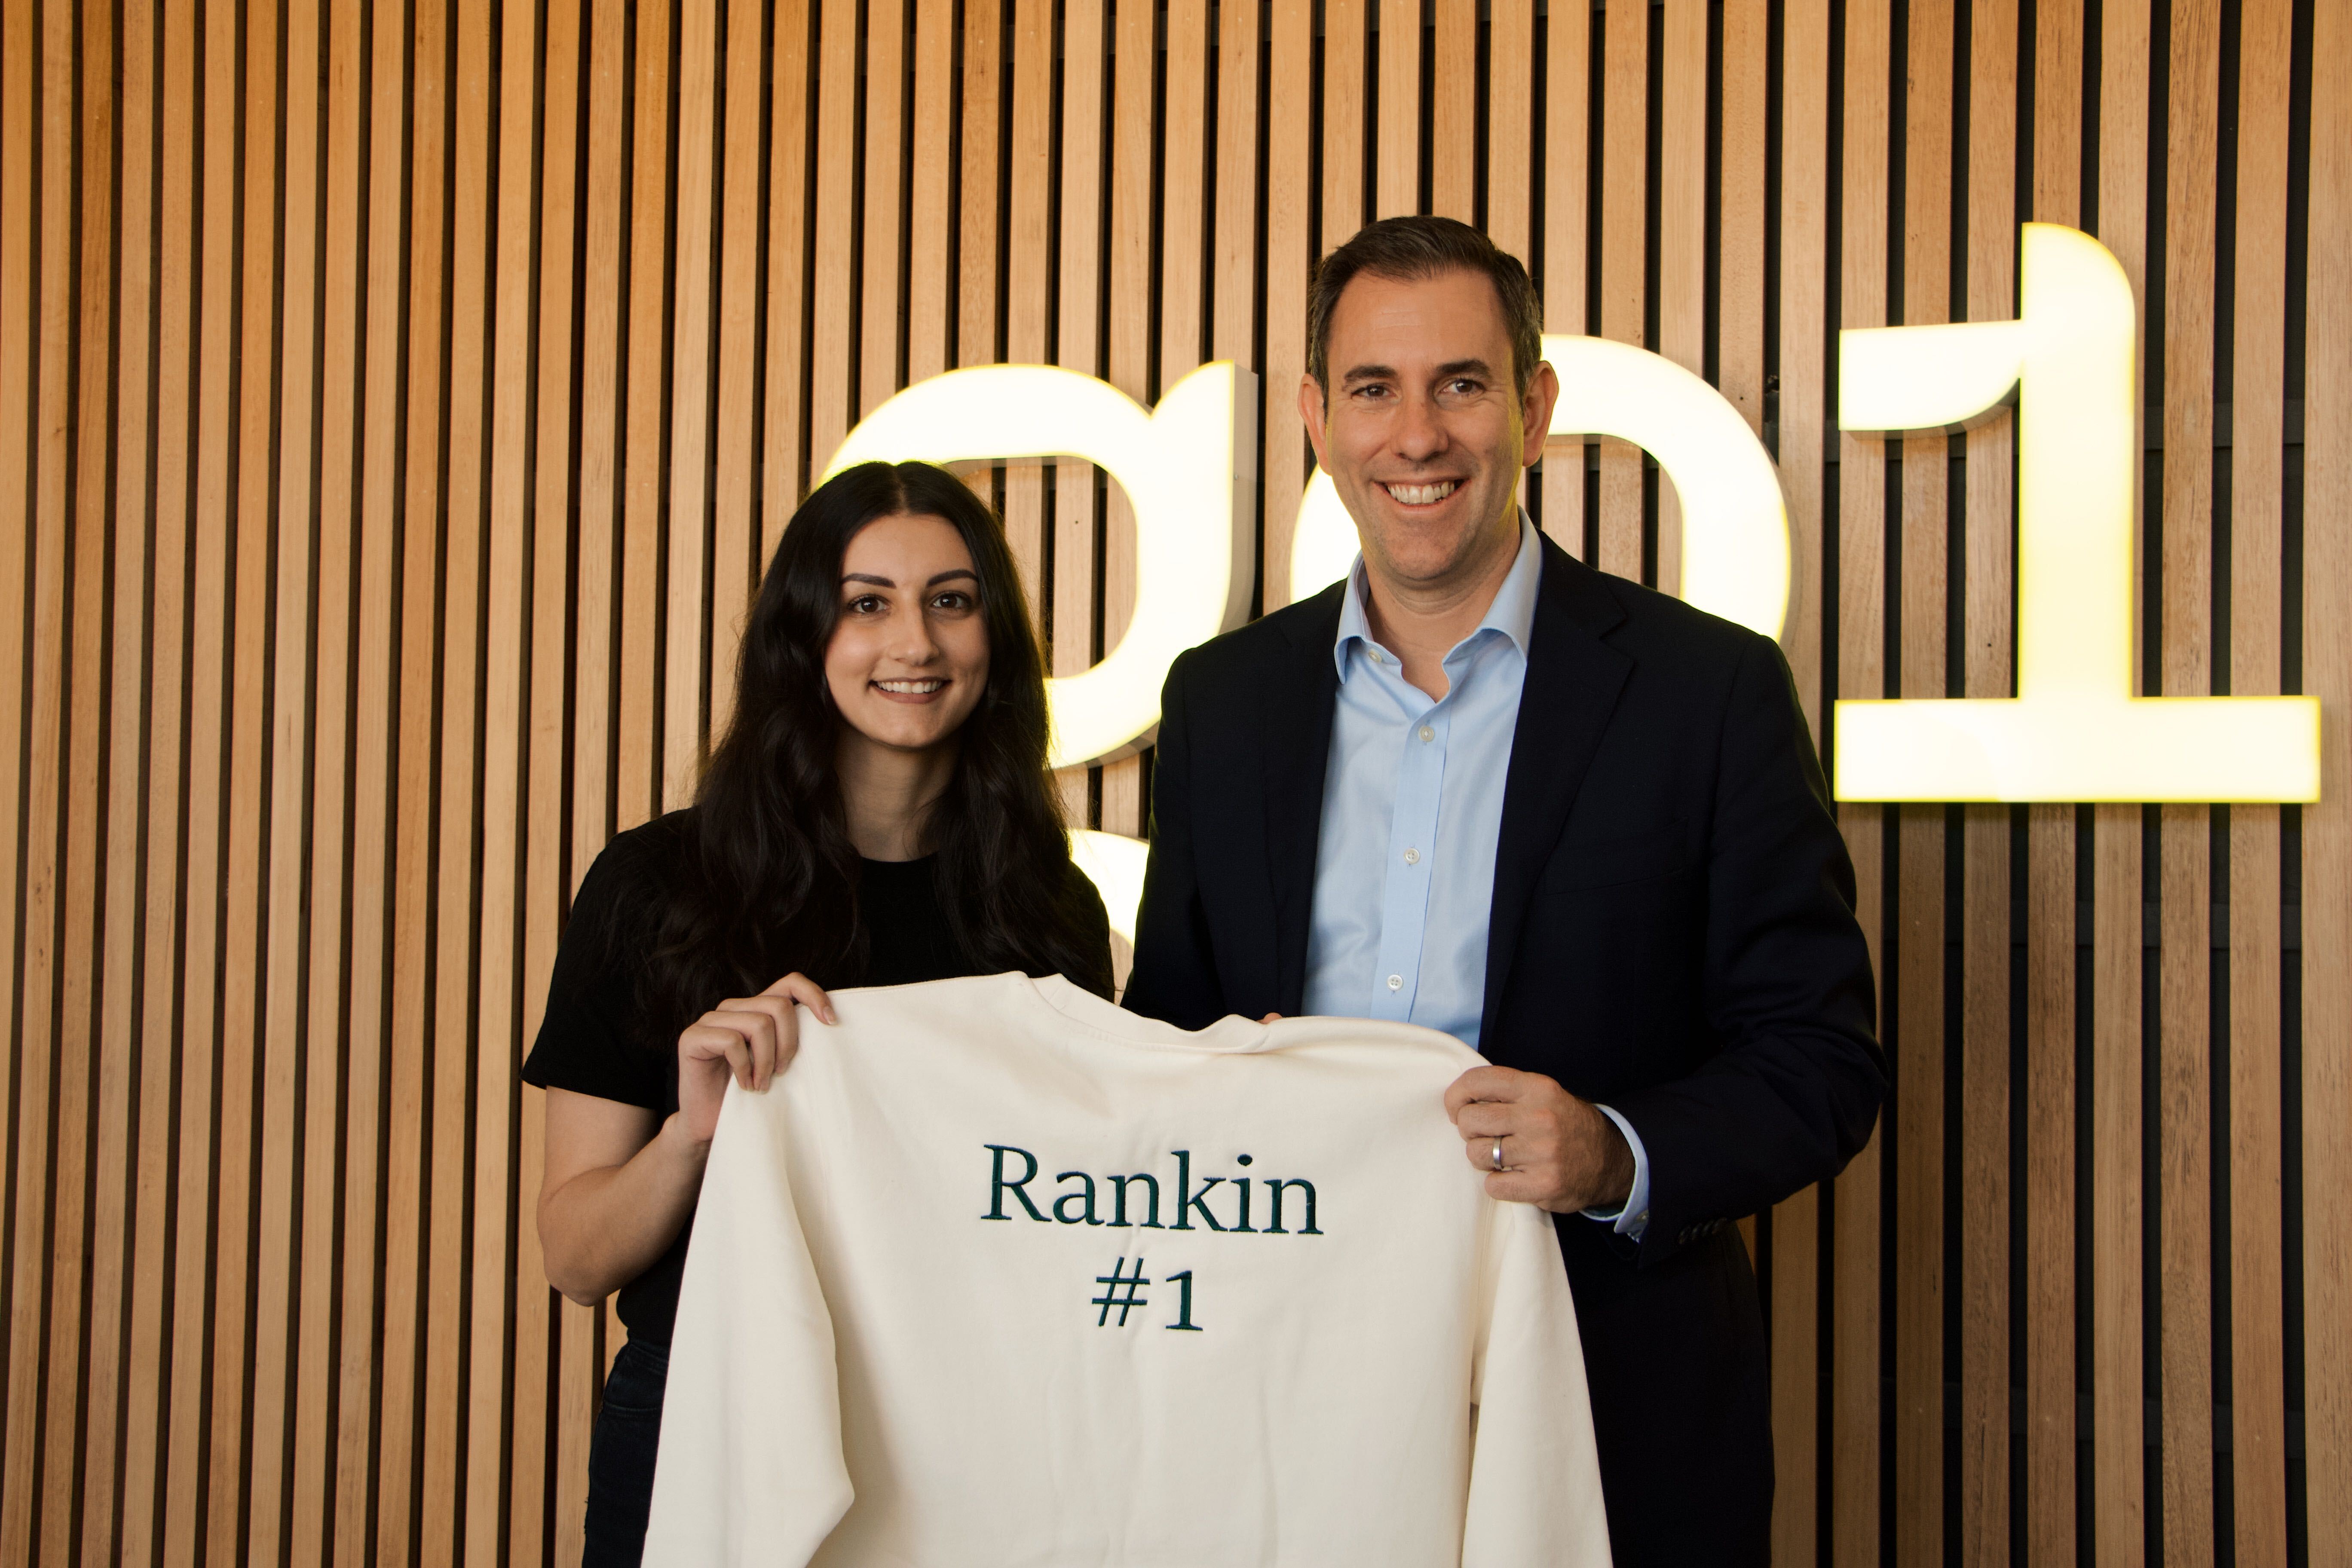 Jim Chalmers, MP and Go1's Tiffany Abi-Fares holding a sweater saying Rankin #1